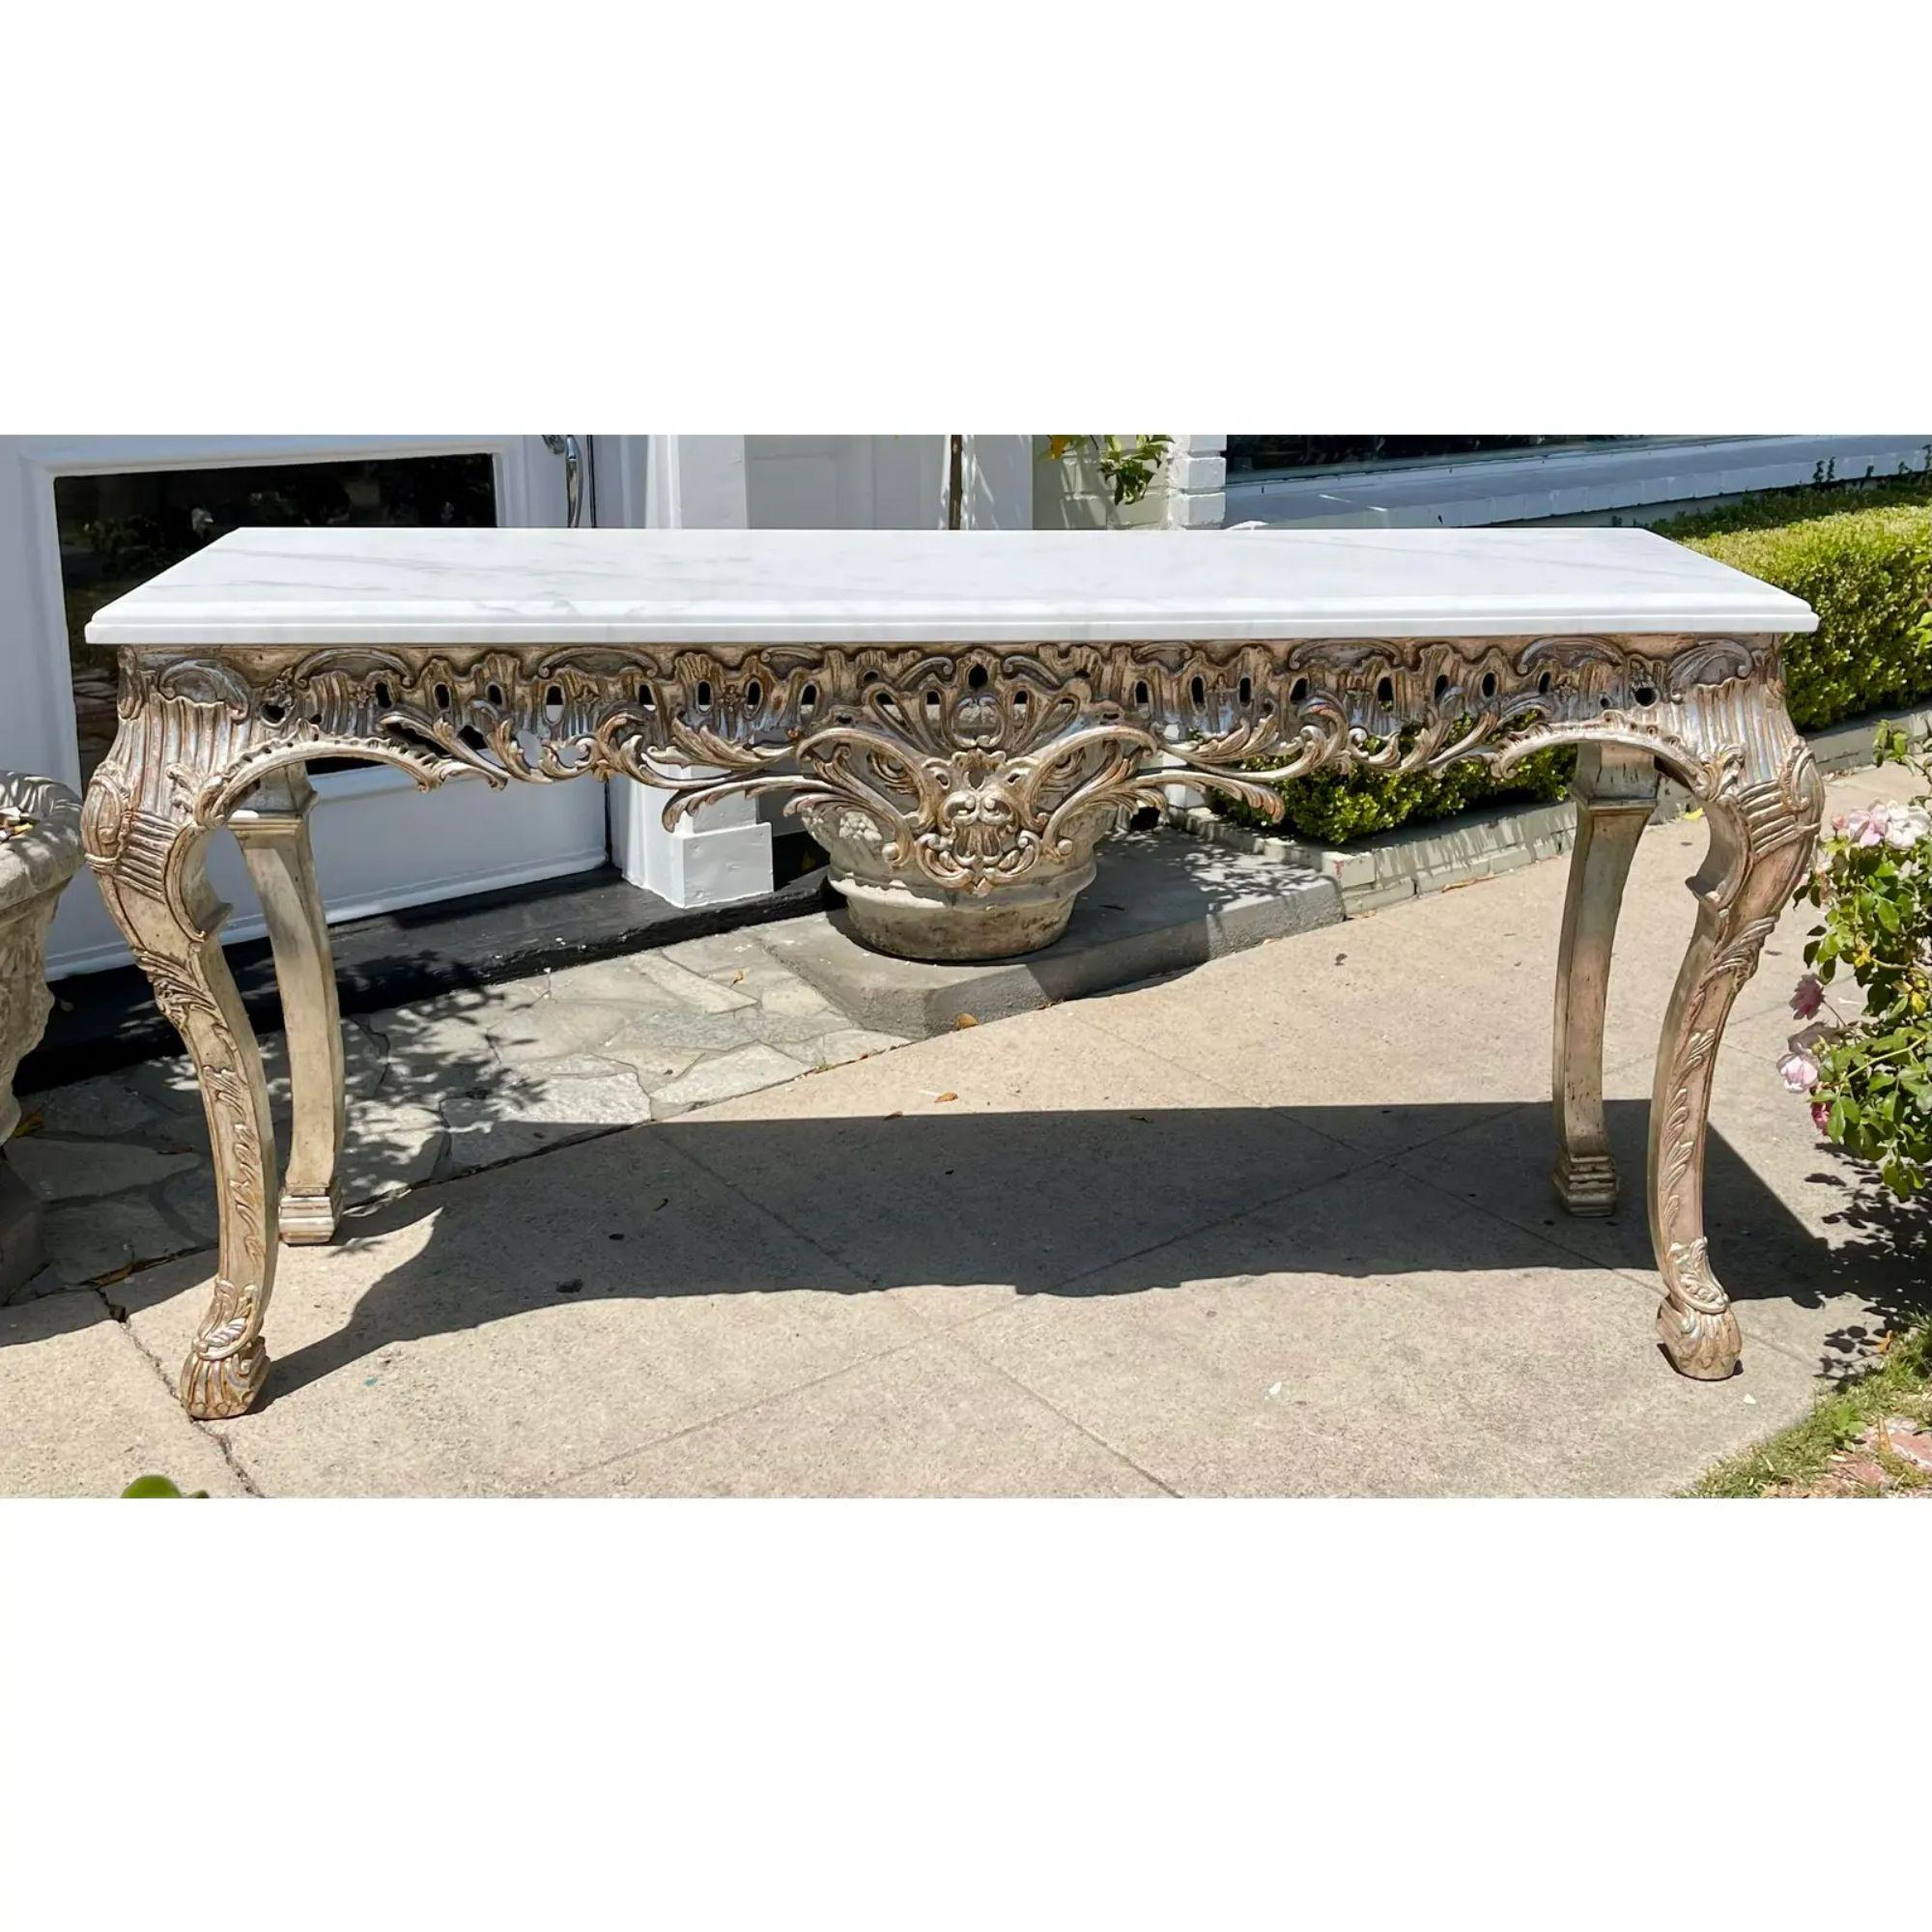 18th C Style Giltwood & Calcutta marble console table

Additional information: 
Materials: Giltwood, Marble
Color: Silver
Period: 2010s
Styles: Louis XVI, Rococo
Table Shape: Rectangle
Item Type: Vintage, Antique or Pre-owned
Dimensions: